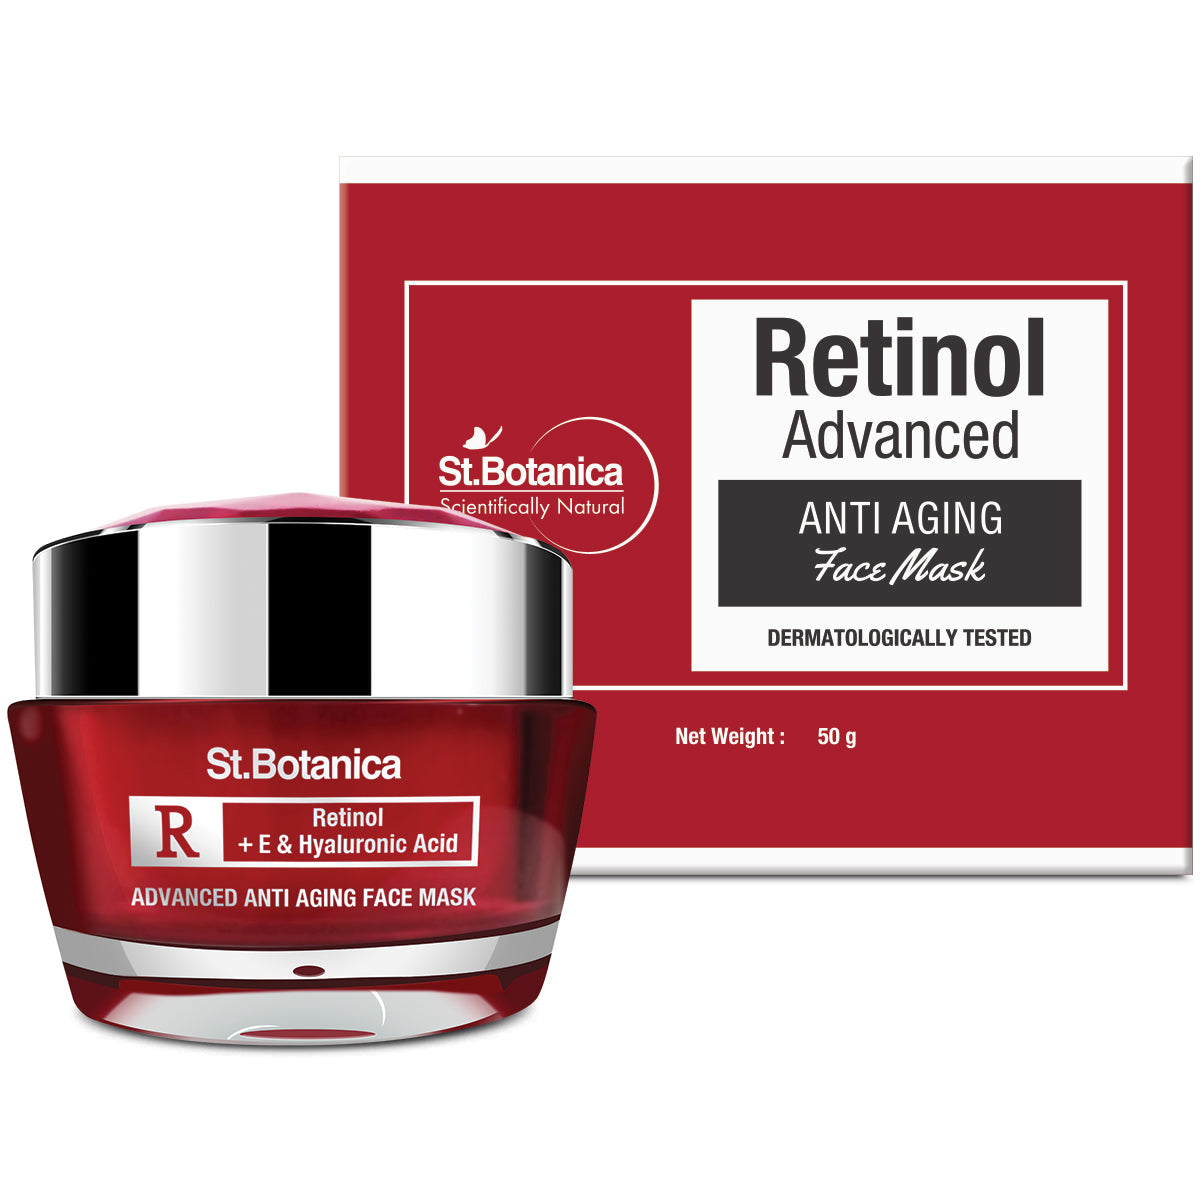 St.Botanica Retinol Advanced Anti Aging Face Mask, with Retinol, Hyaluronic Acid, Vitamin C and Botanical Extracts to remove wrinkles, 50 g